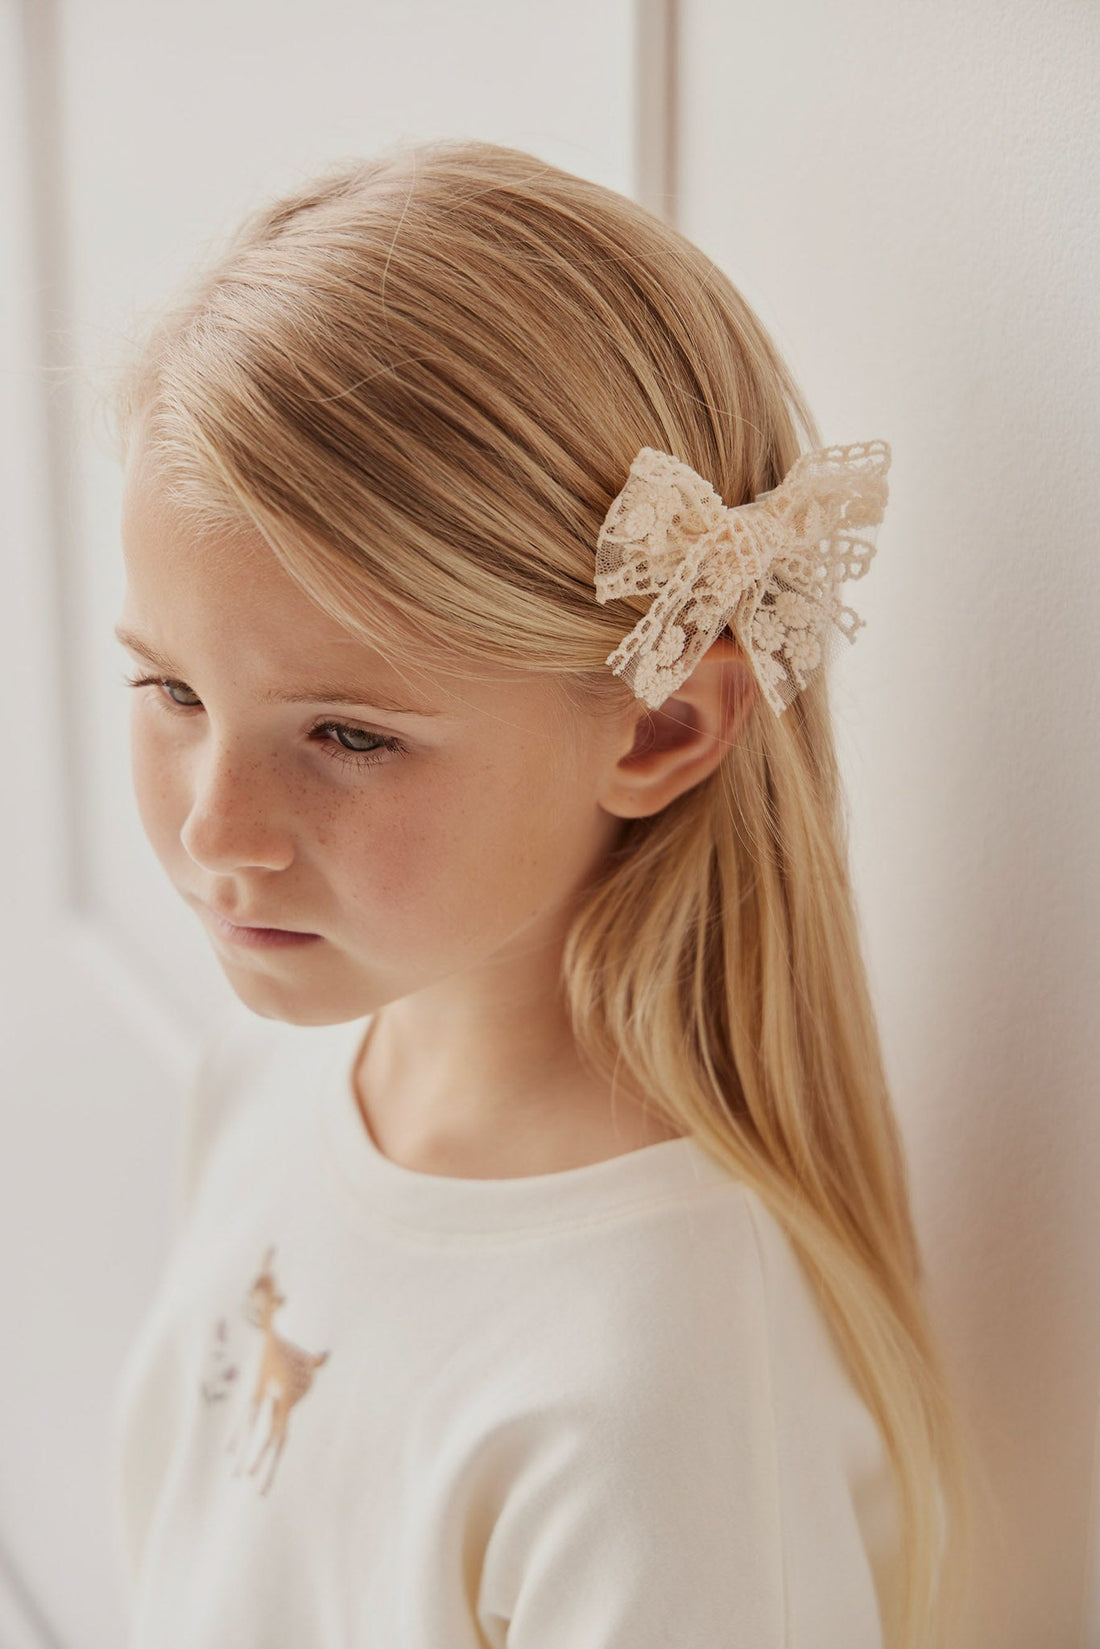 Paloma Hair Clip - Marigold Childrens Hair Accessories from Jamie Kay USA